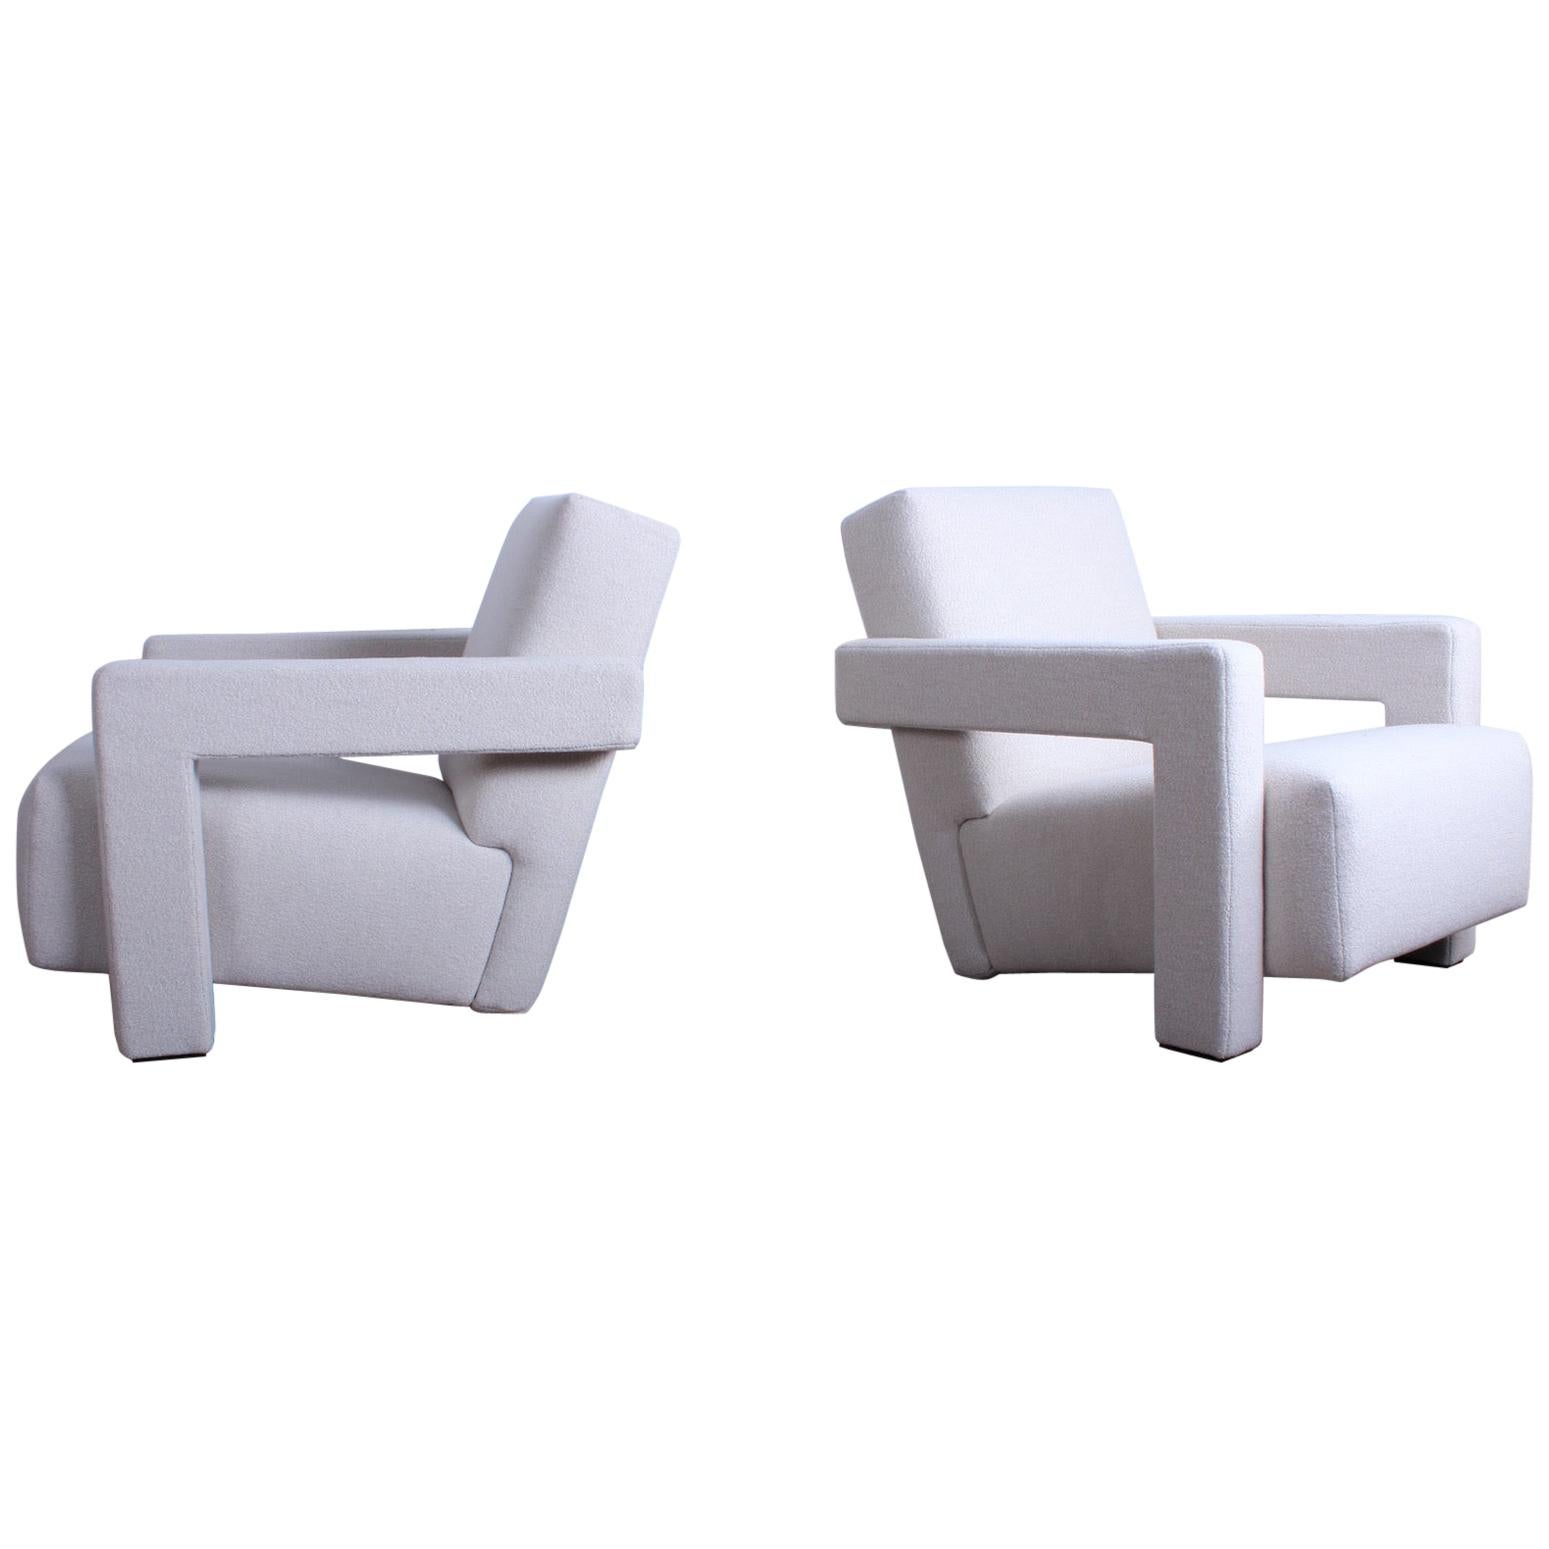 Utrecht Lounge Chairs by Gerrit Rietveld for Cassina